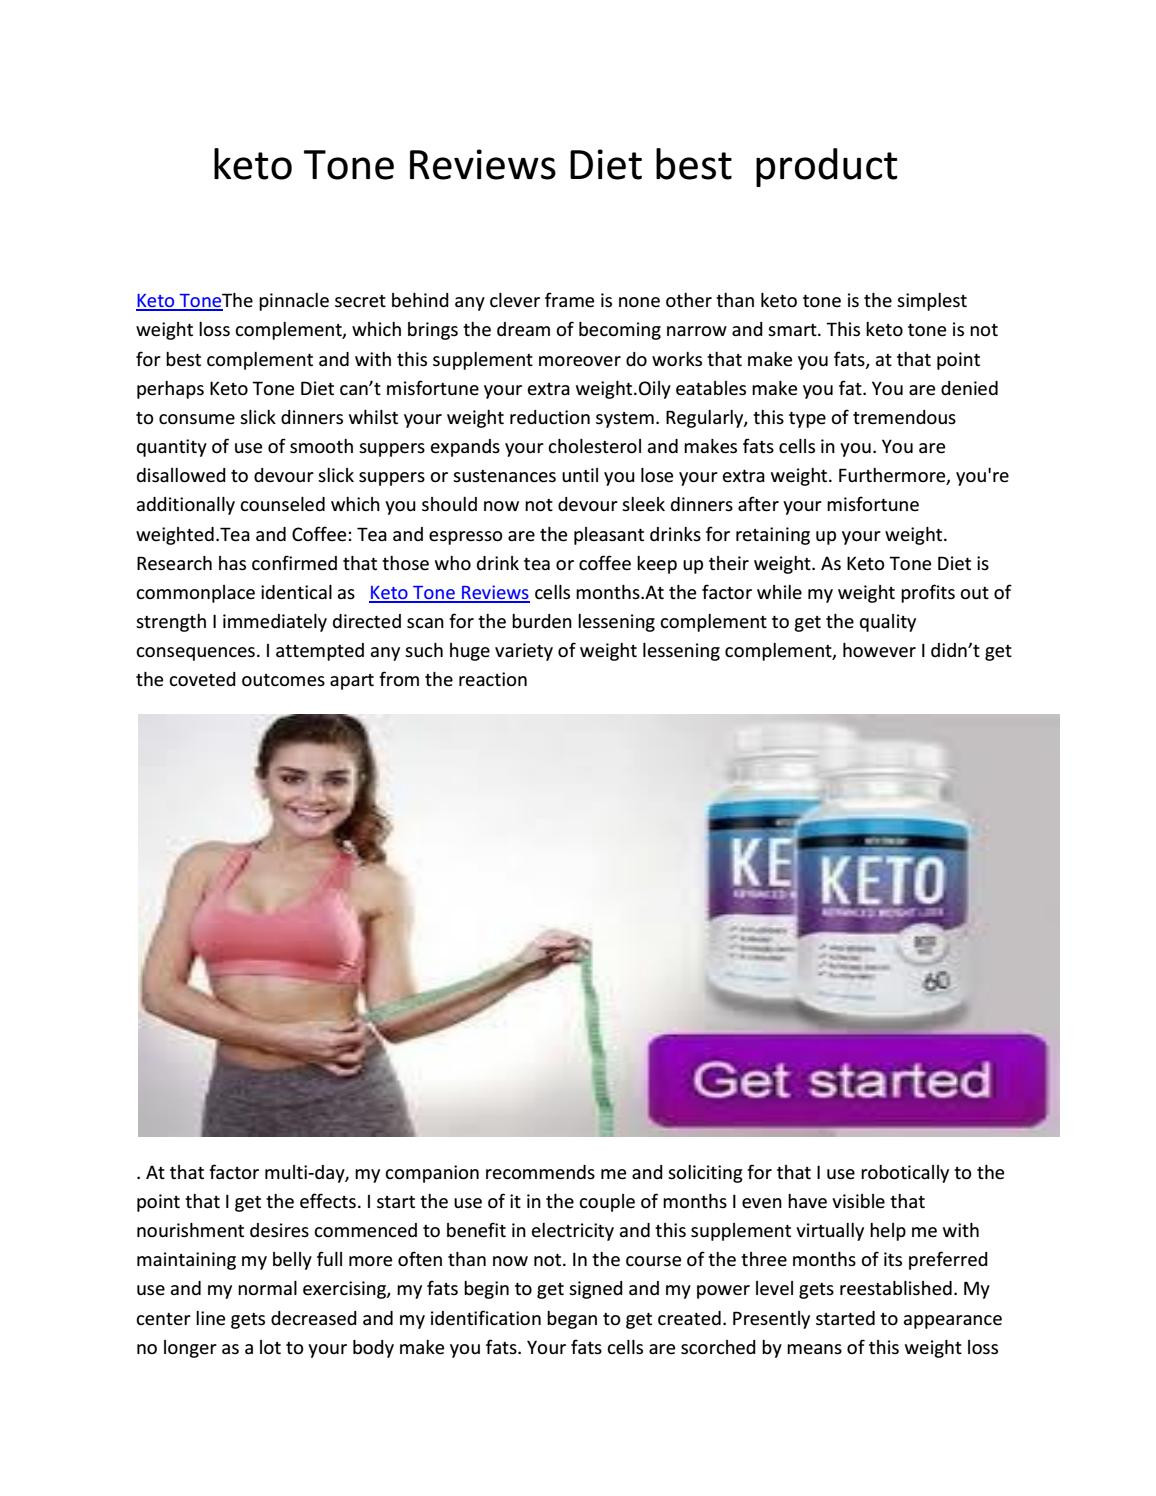 Keto Tone Diet Reviews
 Keto Tone Reviews work Must Read Pros Cons & Side Effects